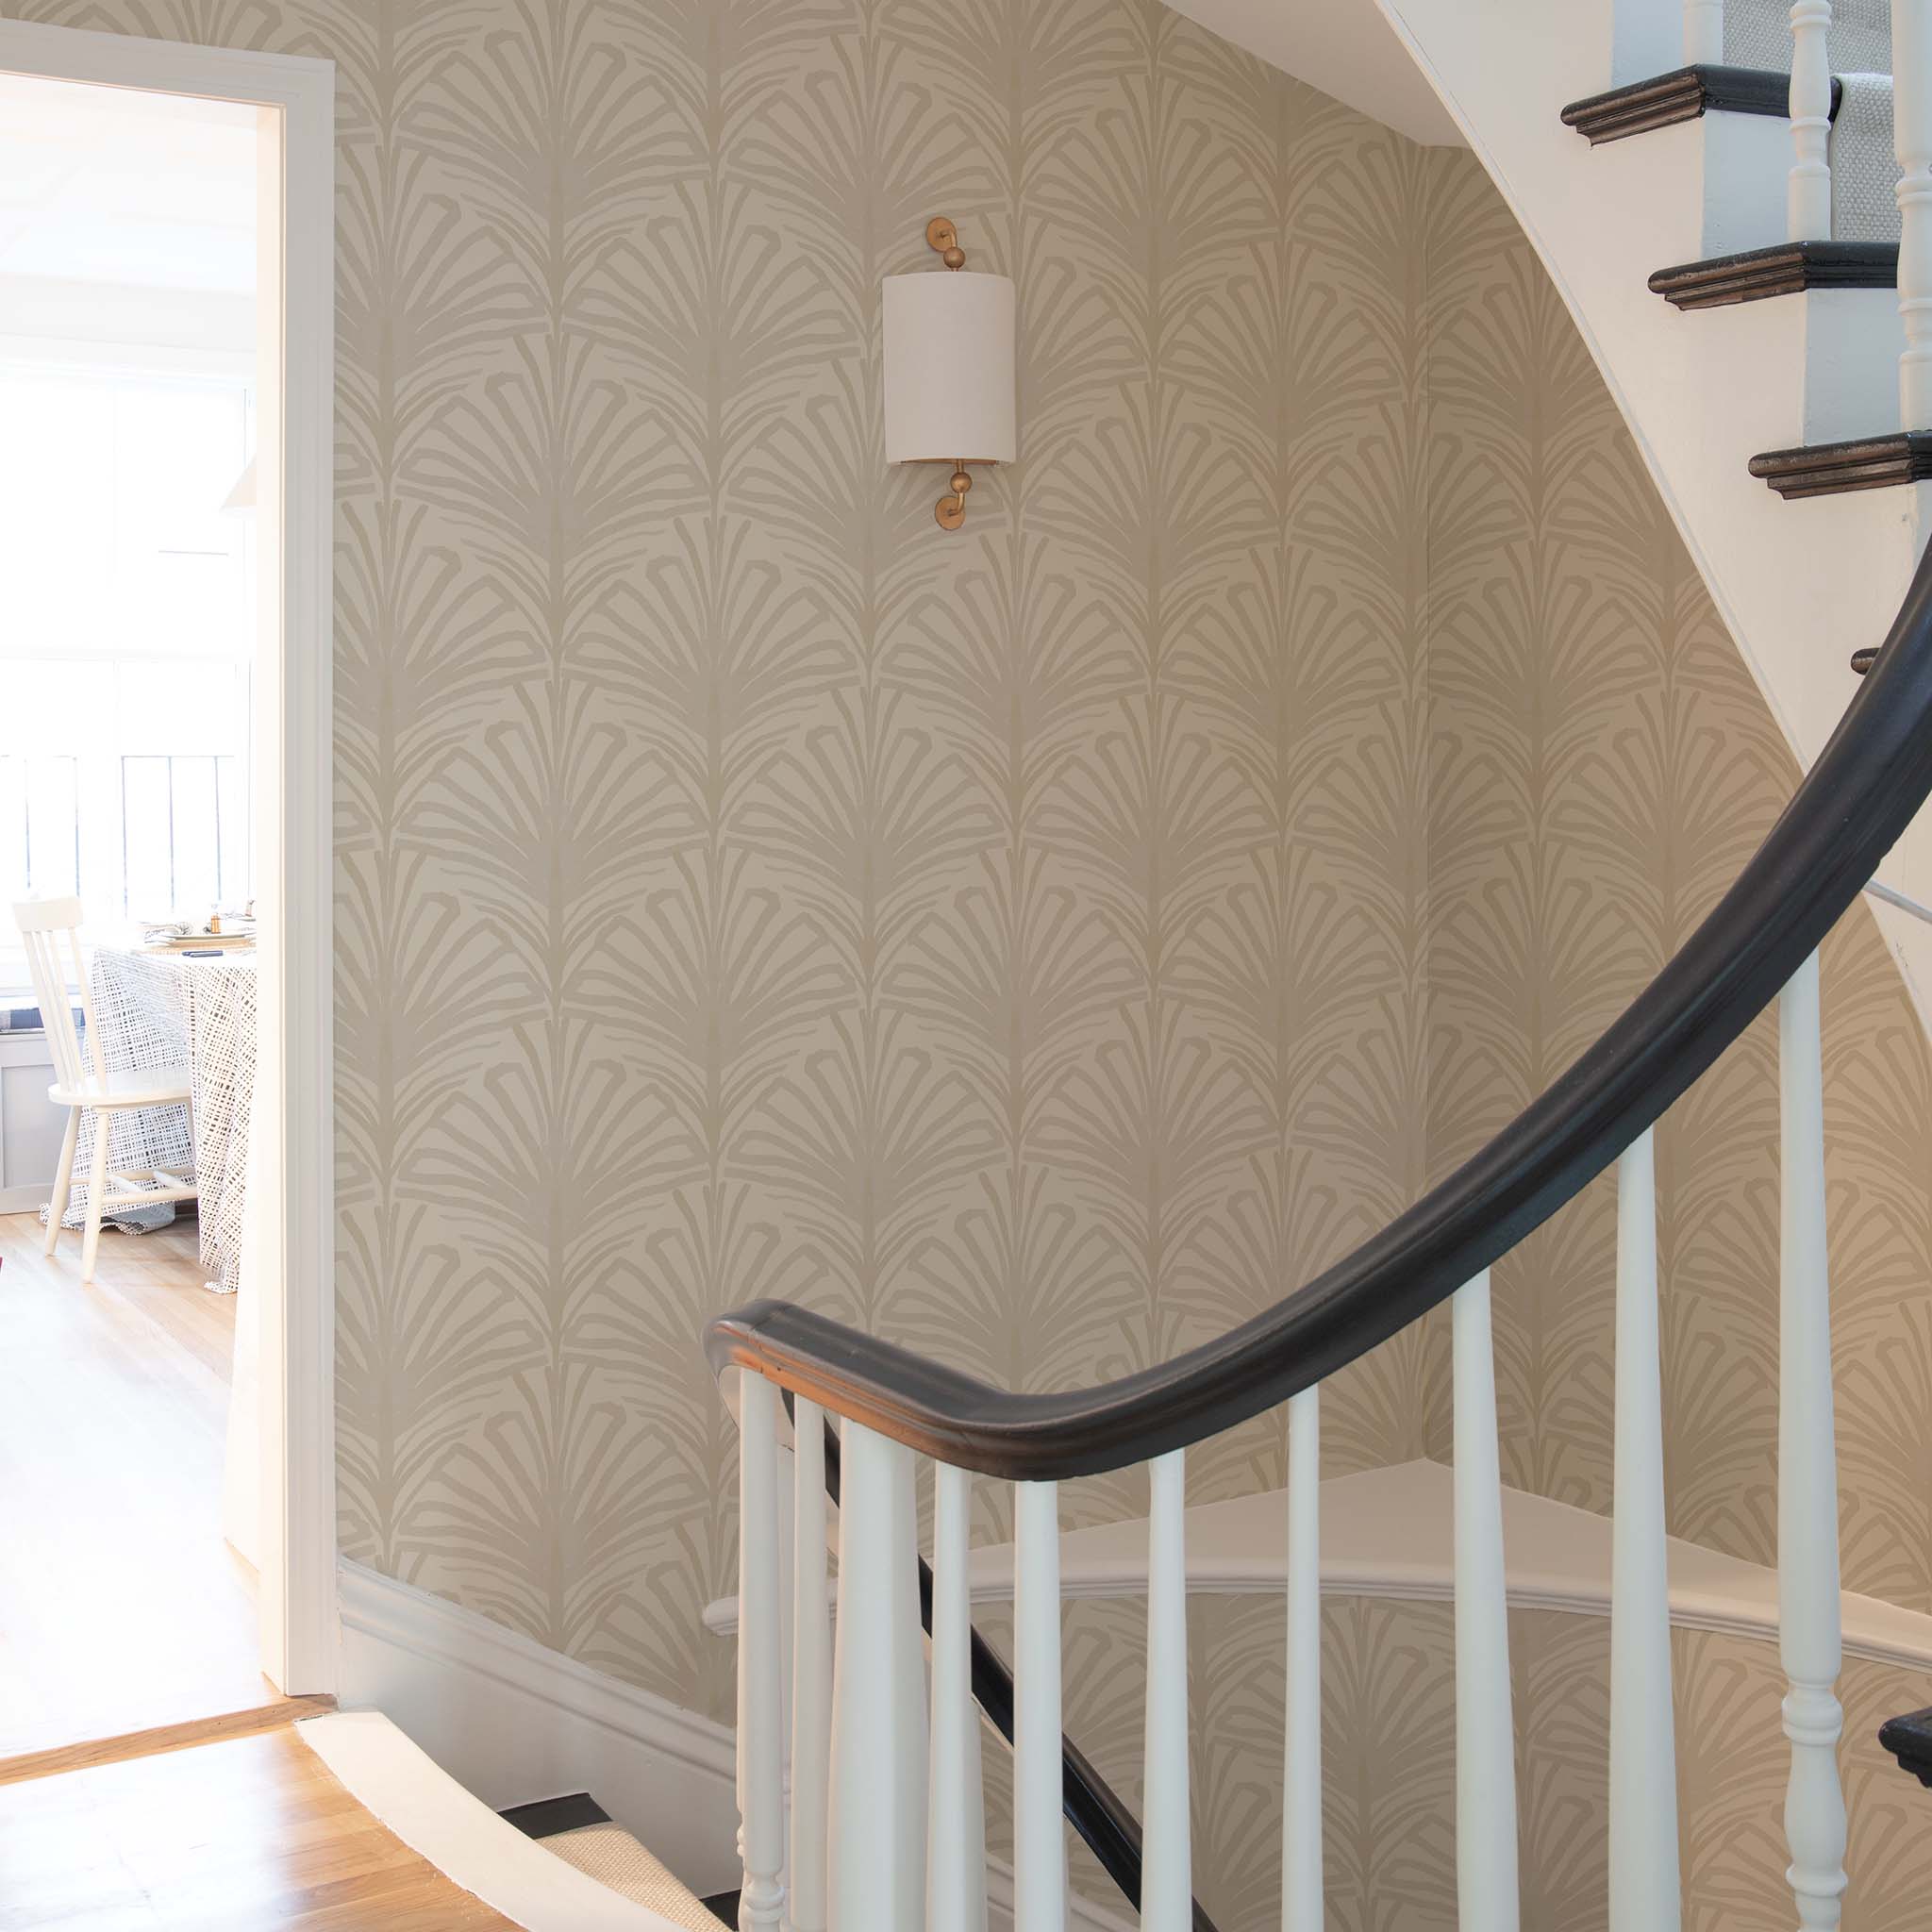 Staircase styled with beige palm printed wallpaper